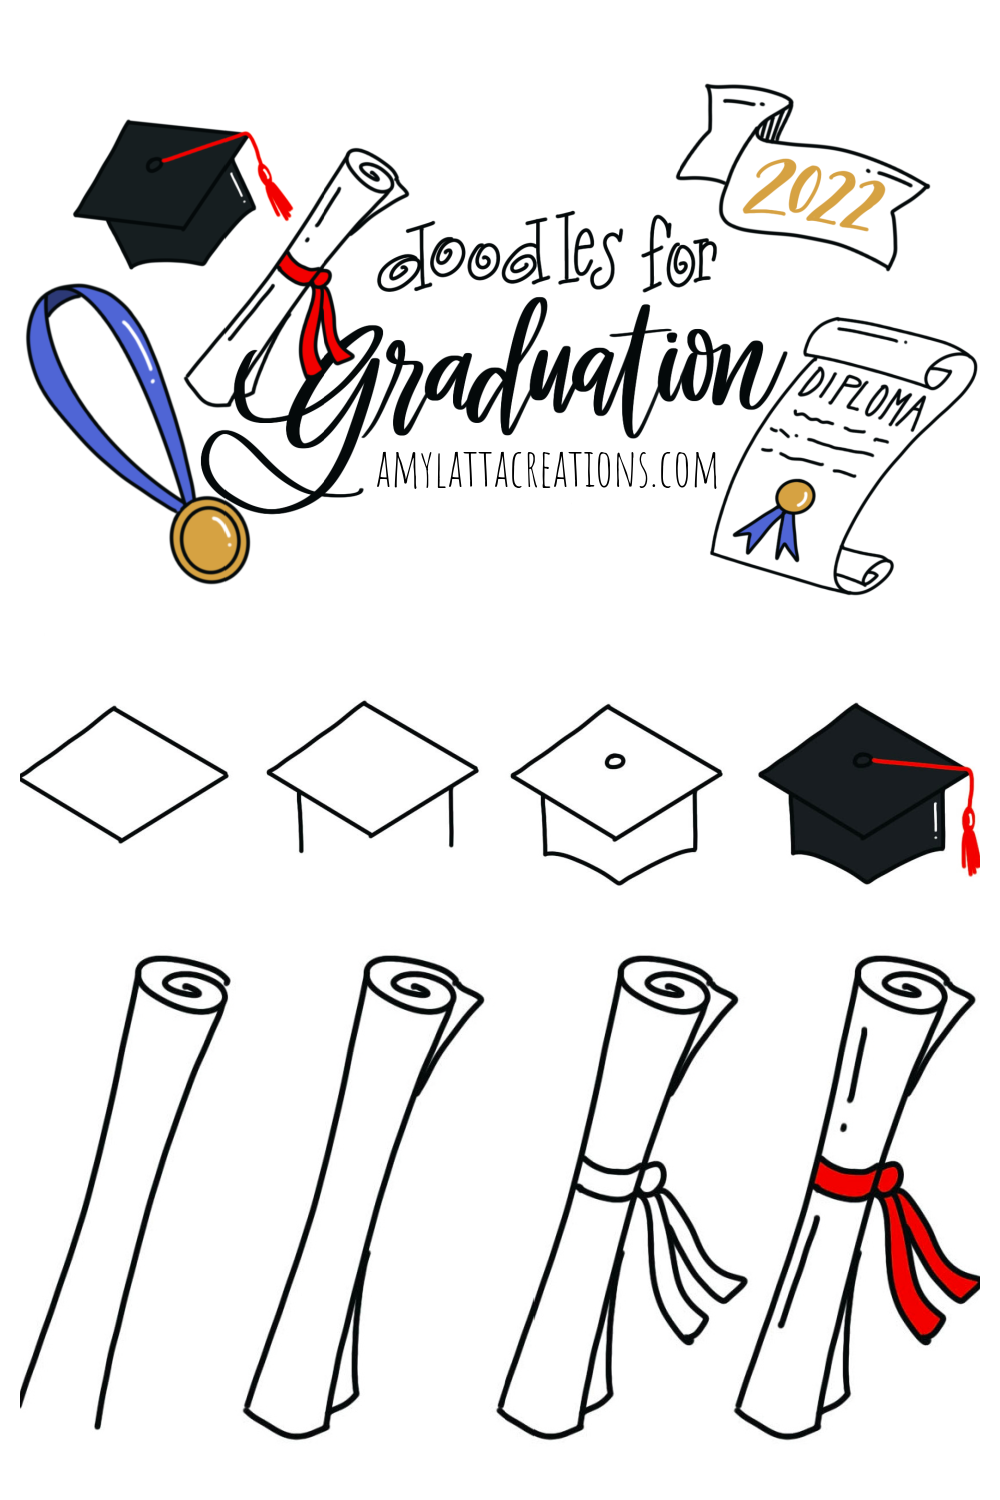 Image contains a collage of graduation themed doodles.